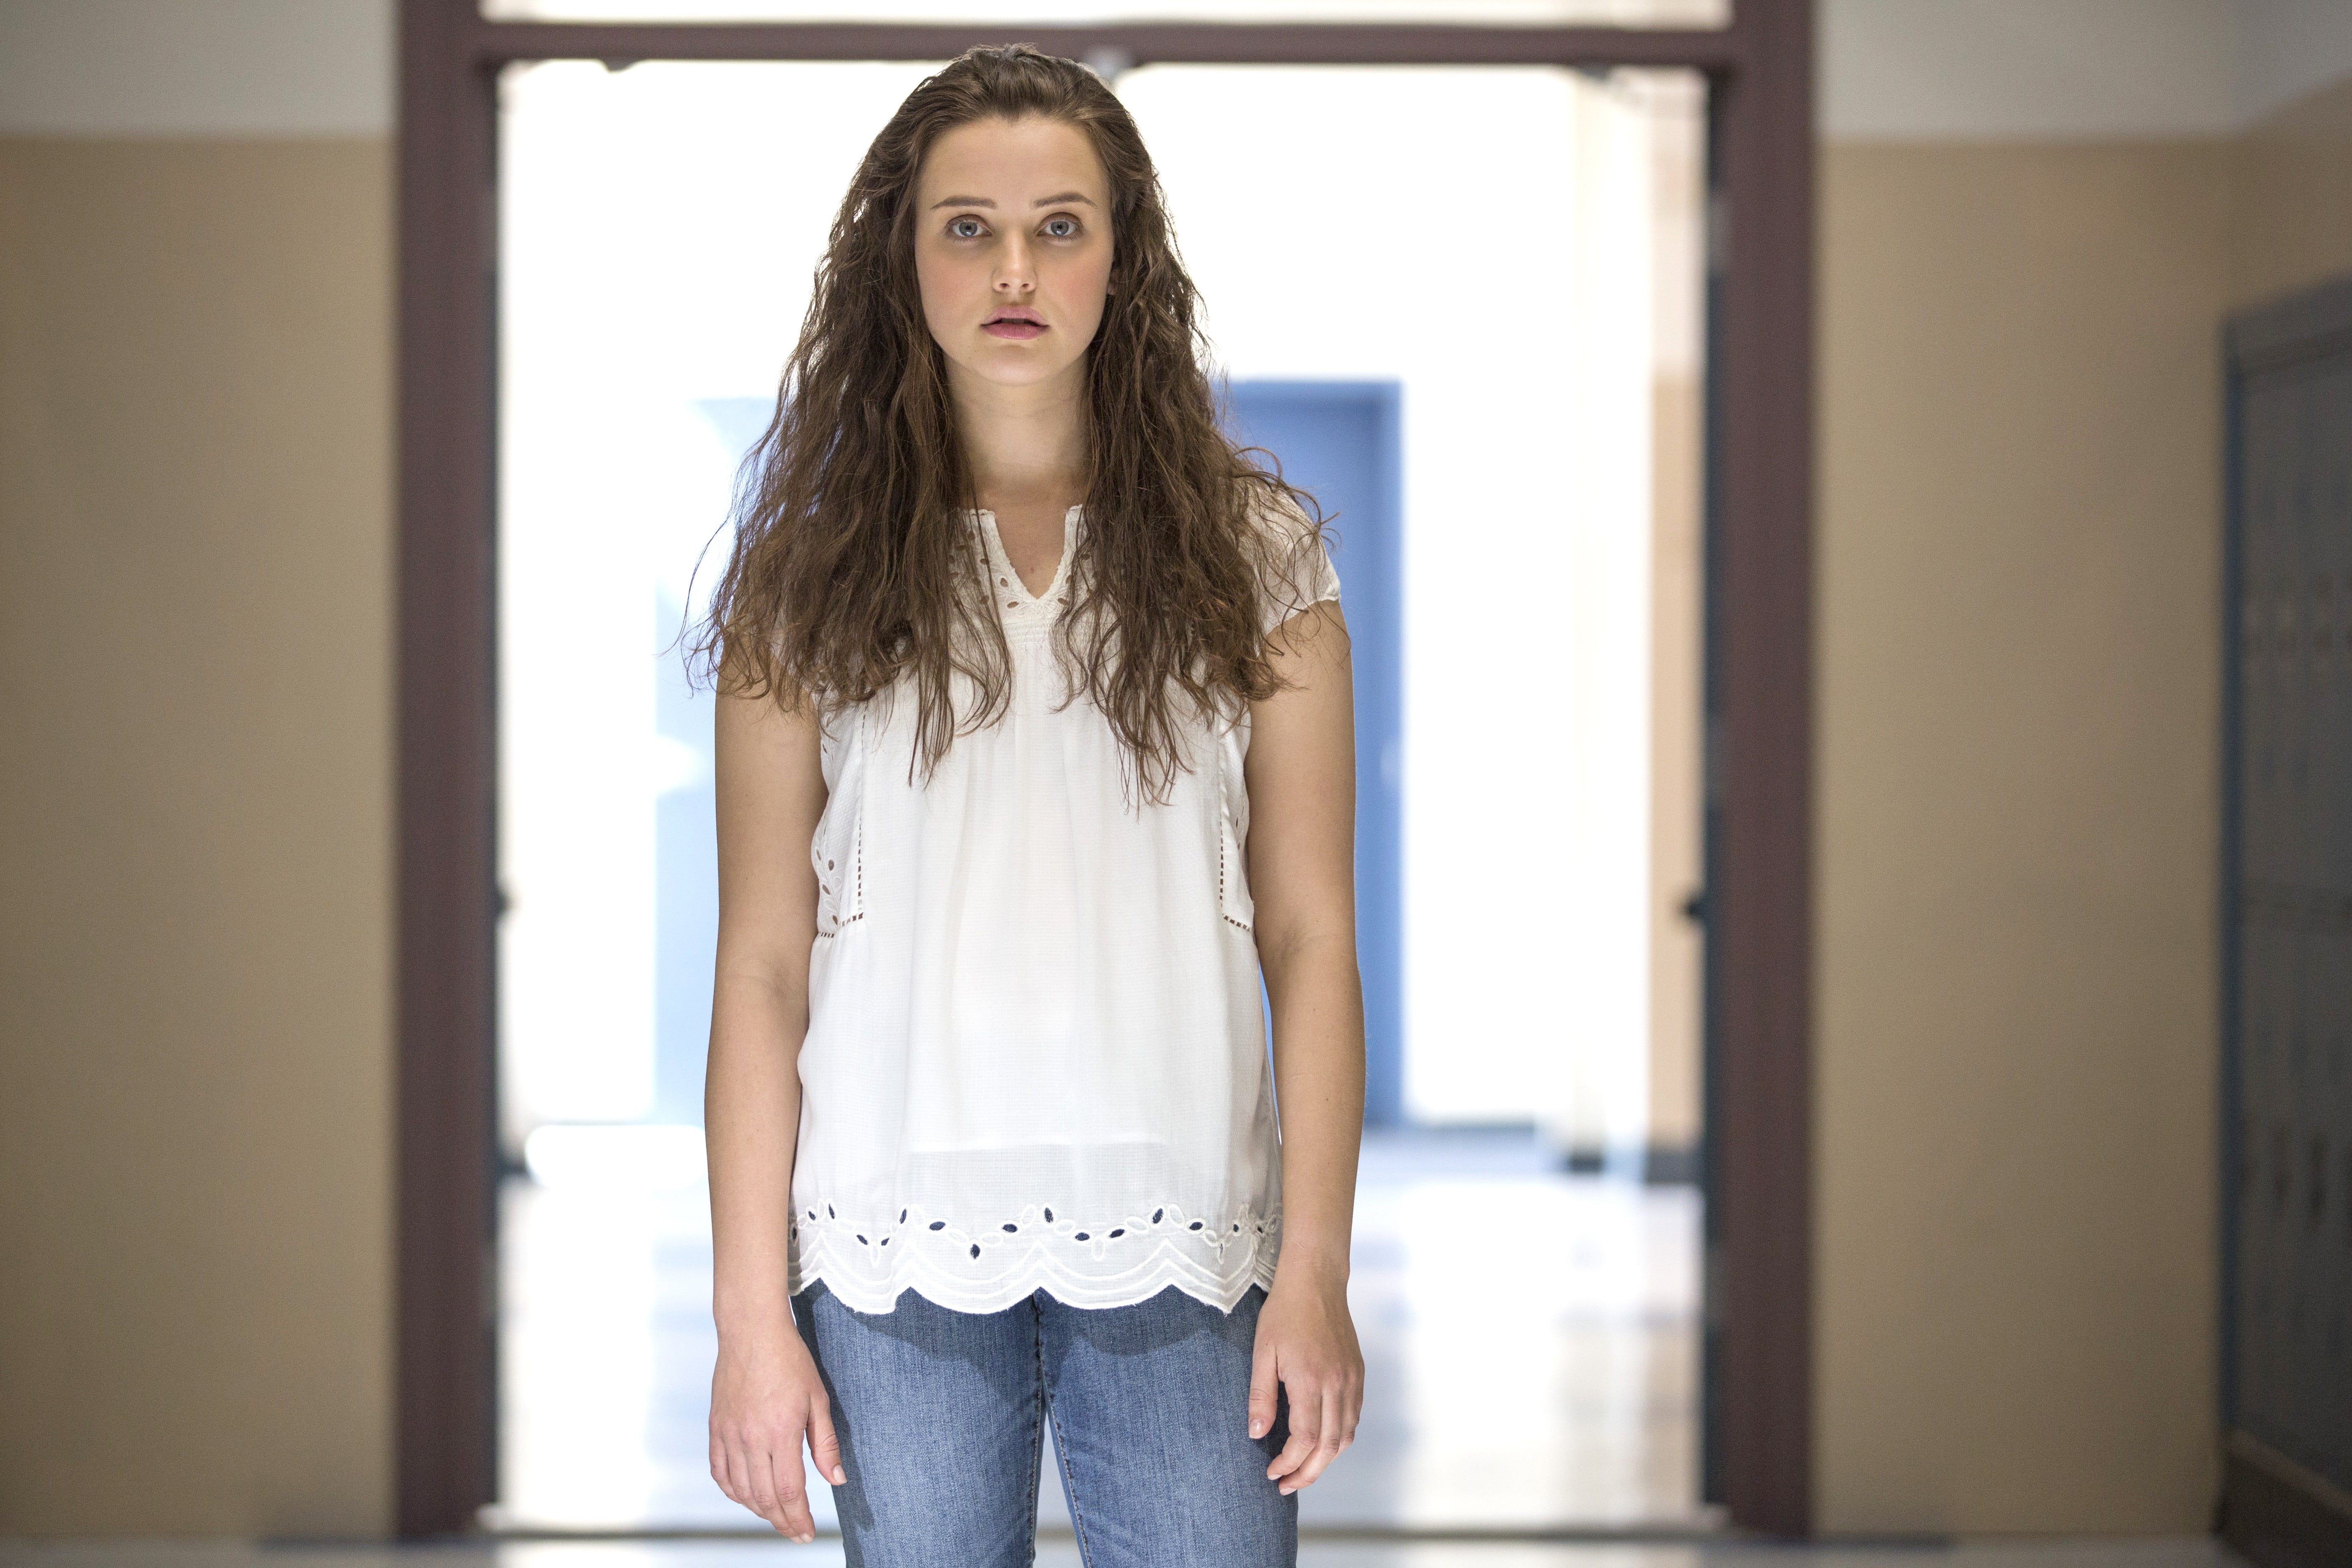 WCSD warns principals, families about “13 Reasons Why”